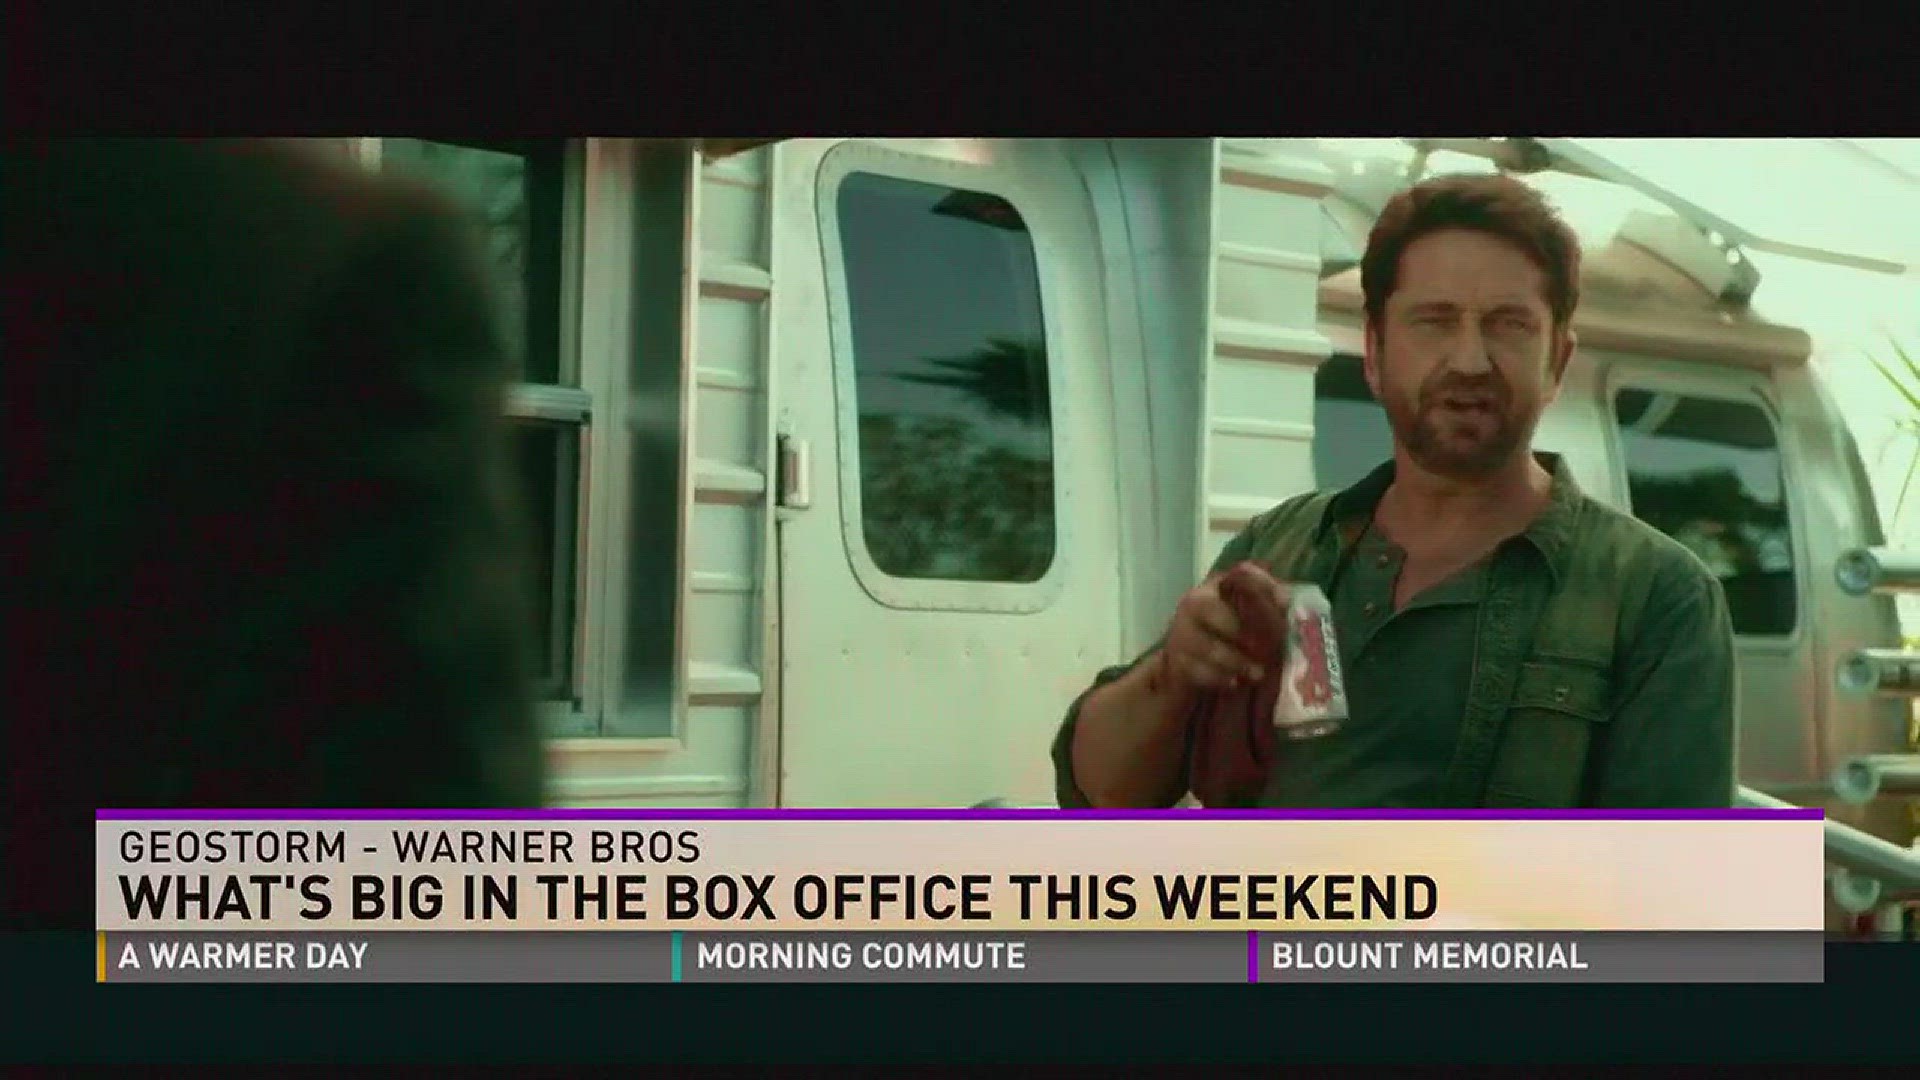 Josh West reviews what's big in the box office this weekend